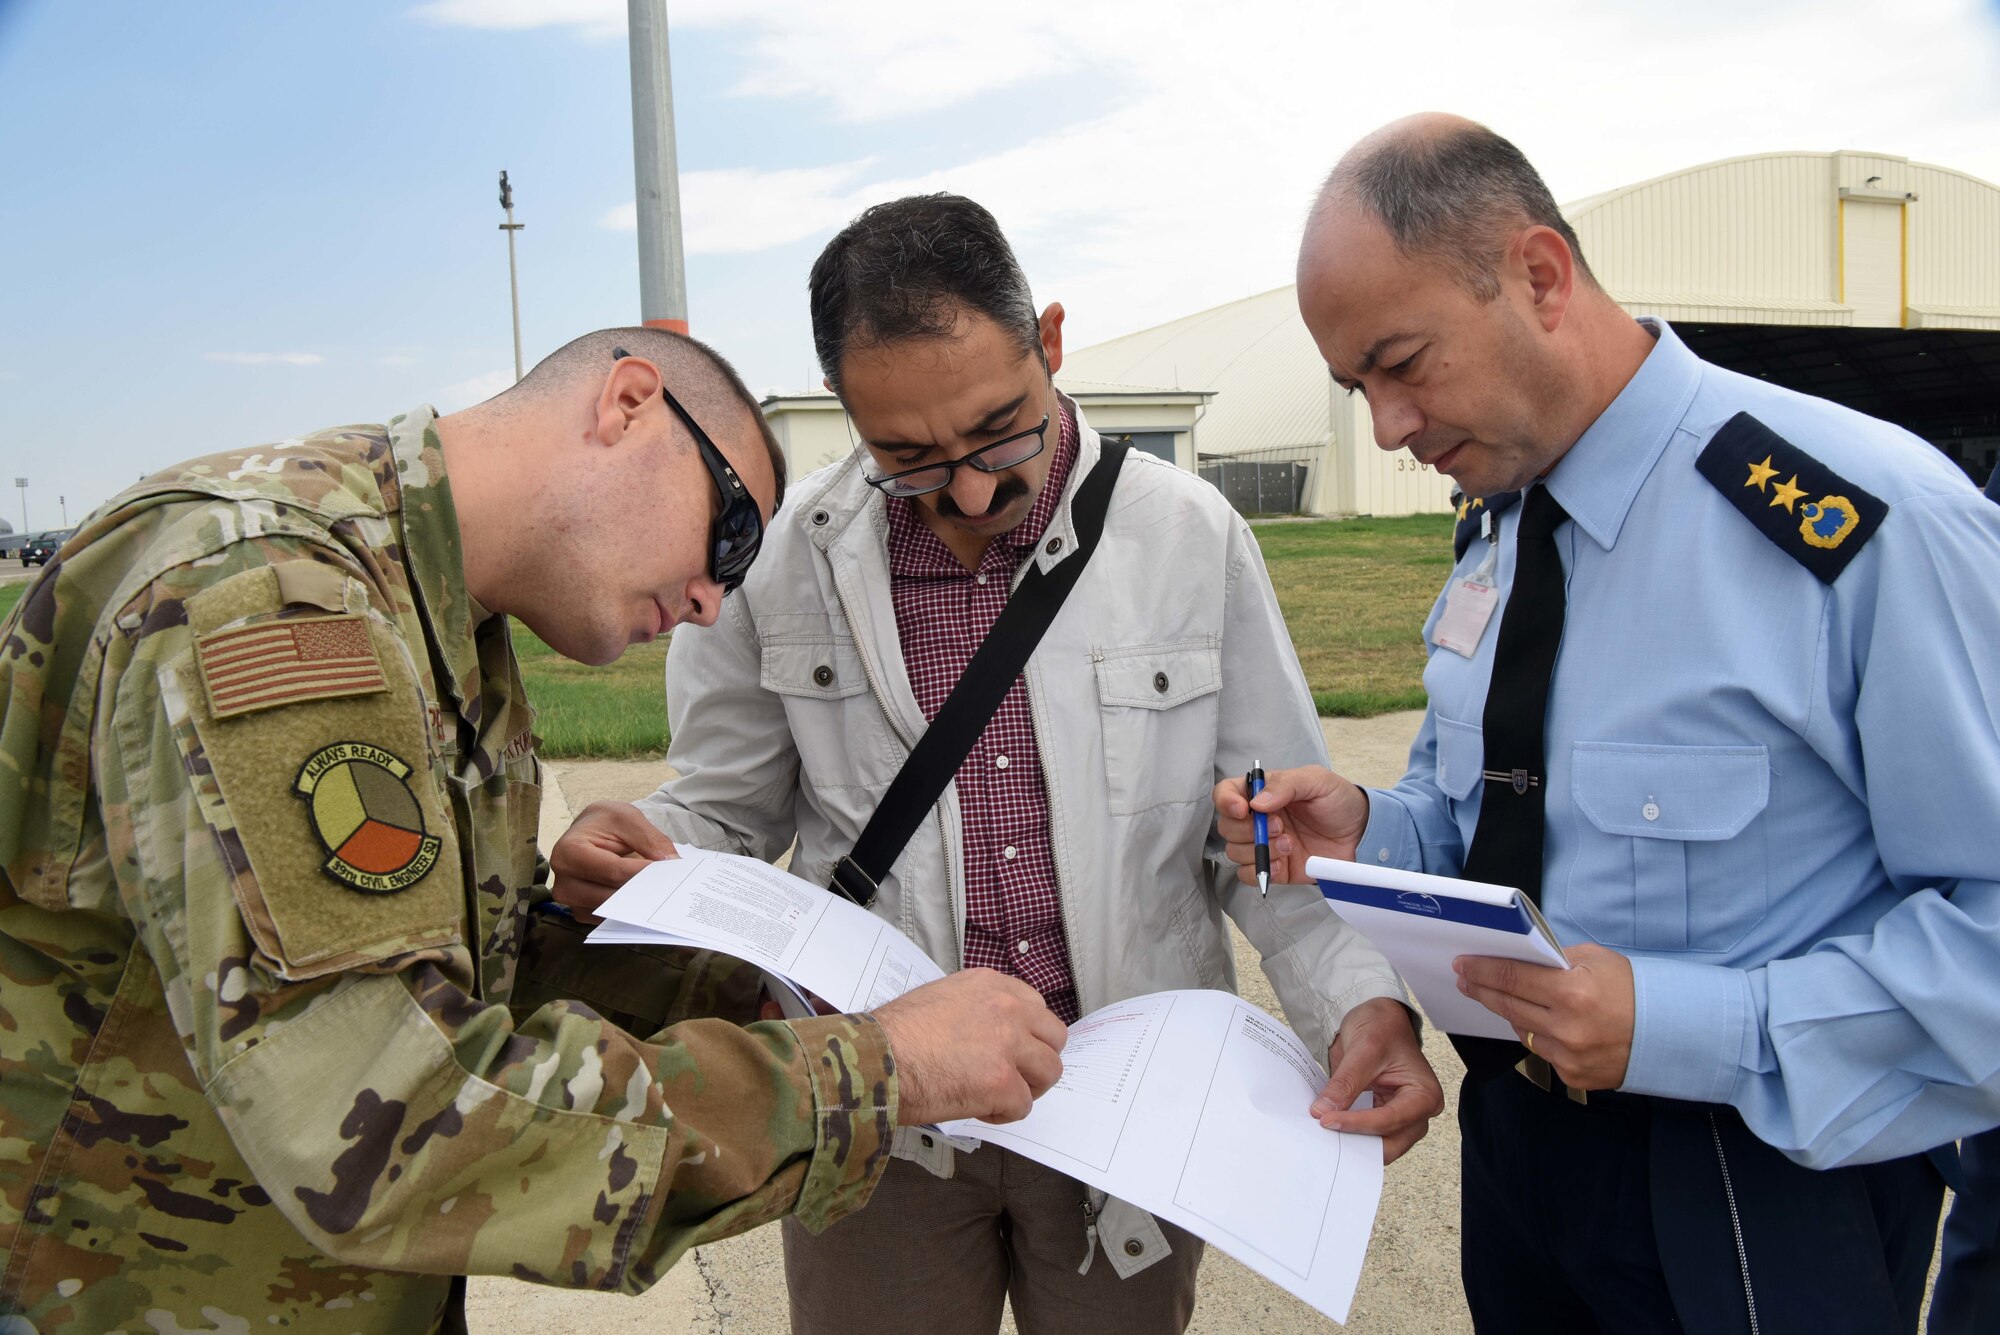 Turkish and U.S. Air Force members collect data during Paver training Oct. 22, 2019, at Incirlik Air Base, Turkey. Students worked together to reach their goals of learning the essentials of gathering pavement condition index data. (U.S. Air Force photo by Tech. Sgt. Jim Araos)